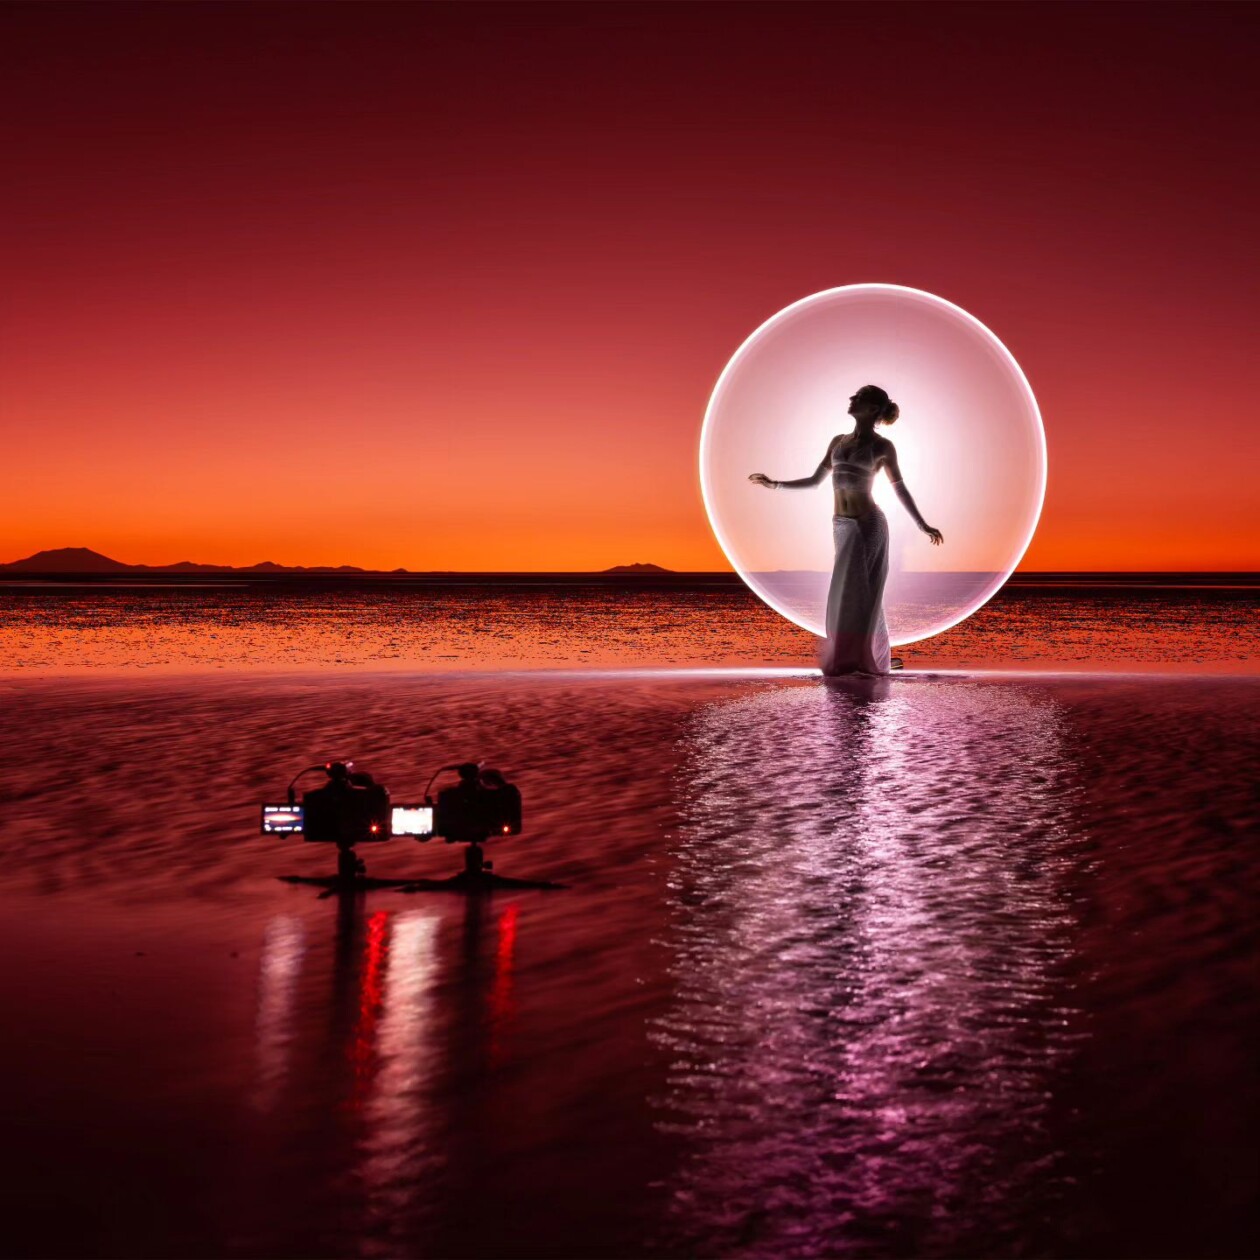 Mesmerizing Light Paintings Set Against A Fiery Red Sky At Bolivias Uyuni Salt Flat By Eric Pare And Kim Henry 1